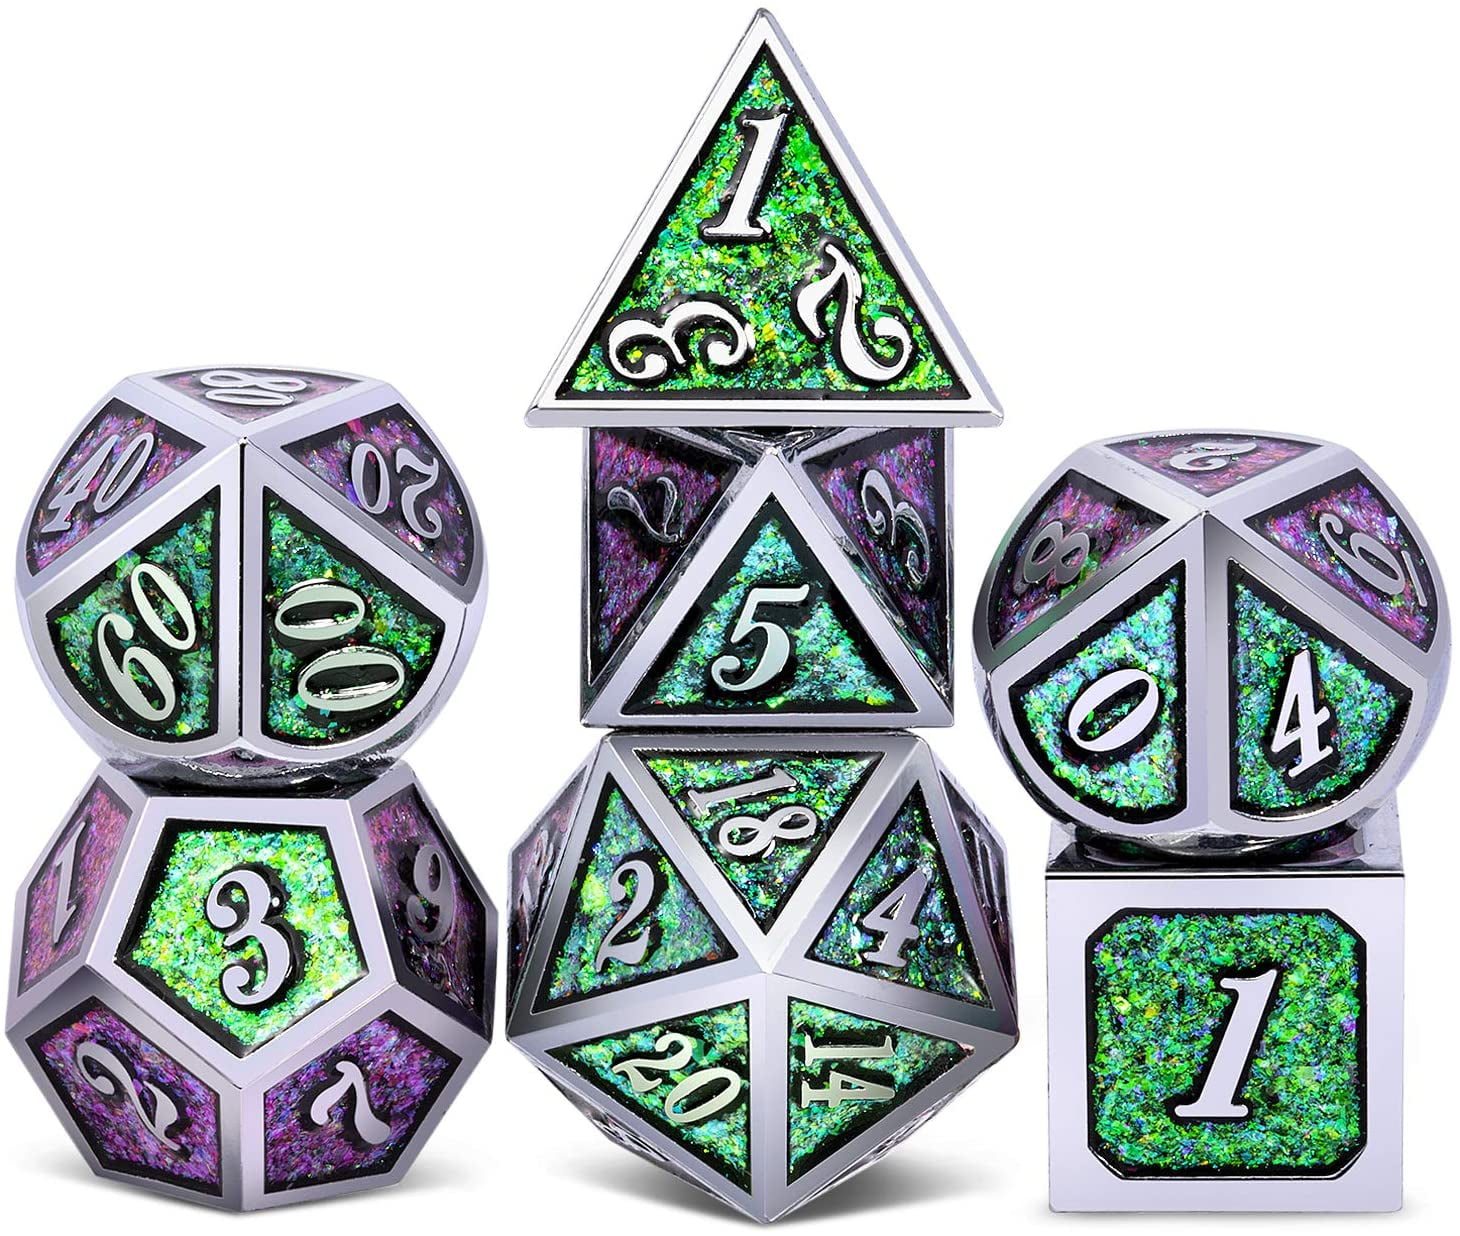  RPG Dungeons And Dragon Ancient Purple DND Dice Set 7pcs with Metal Carry Case